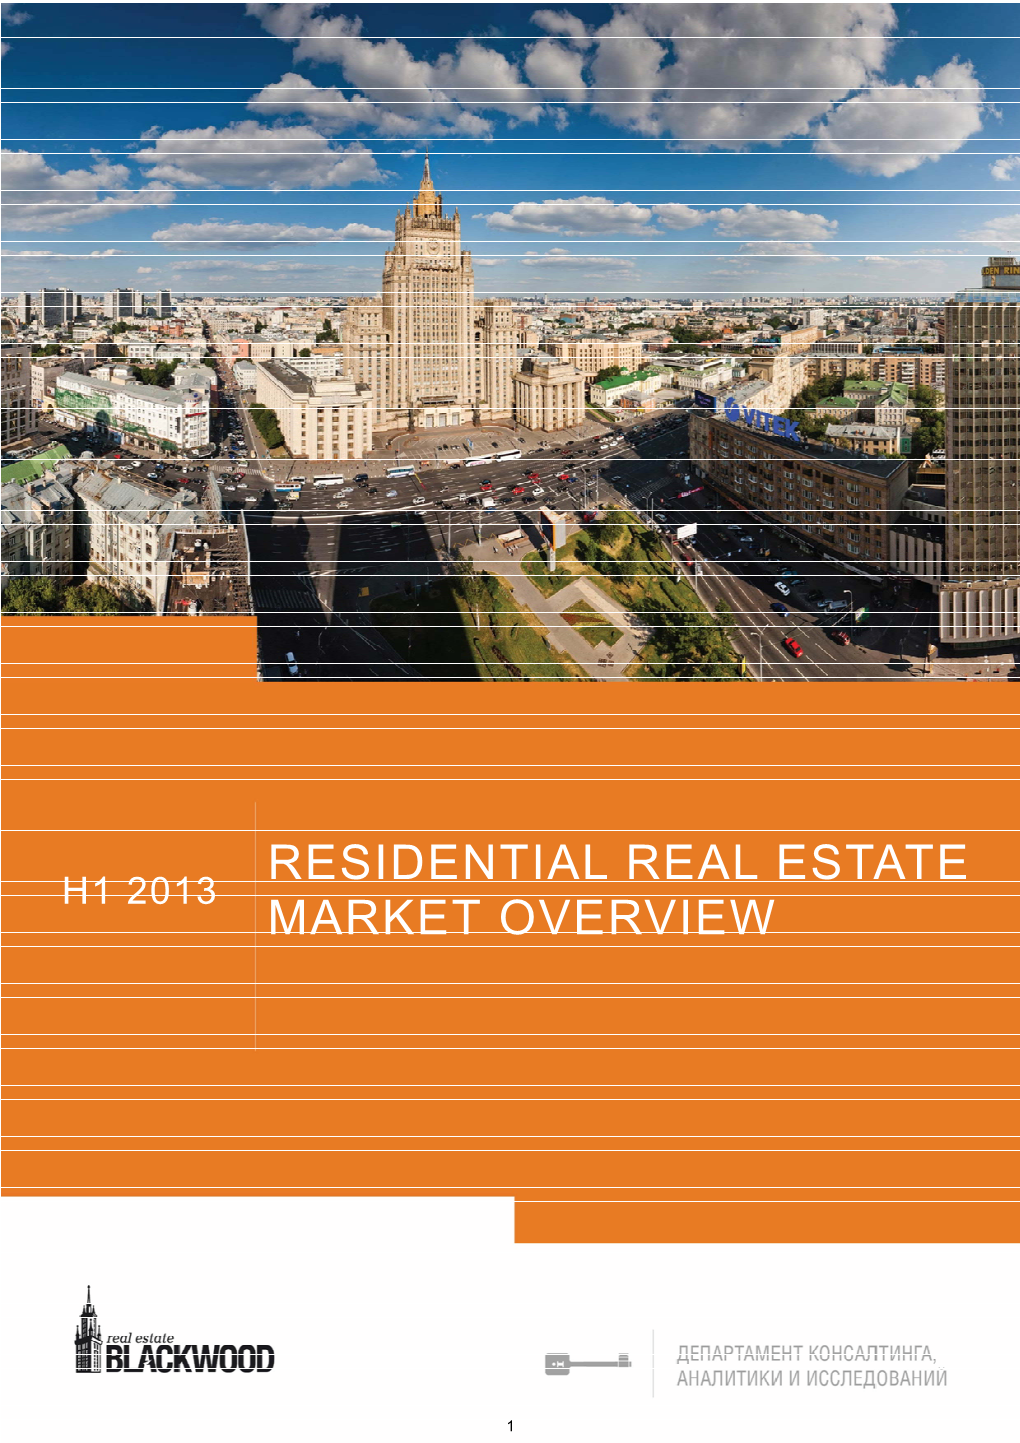 Residential Real Estate Market Overview Residential Real Estate Market Overview H1 Q1 2013 Residential Real Estate 2013